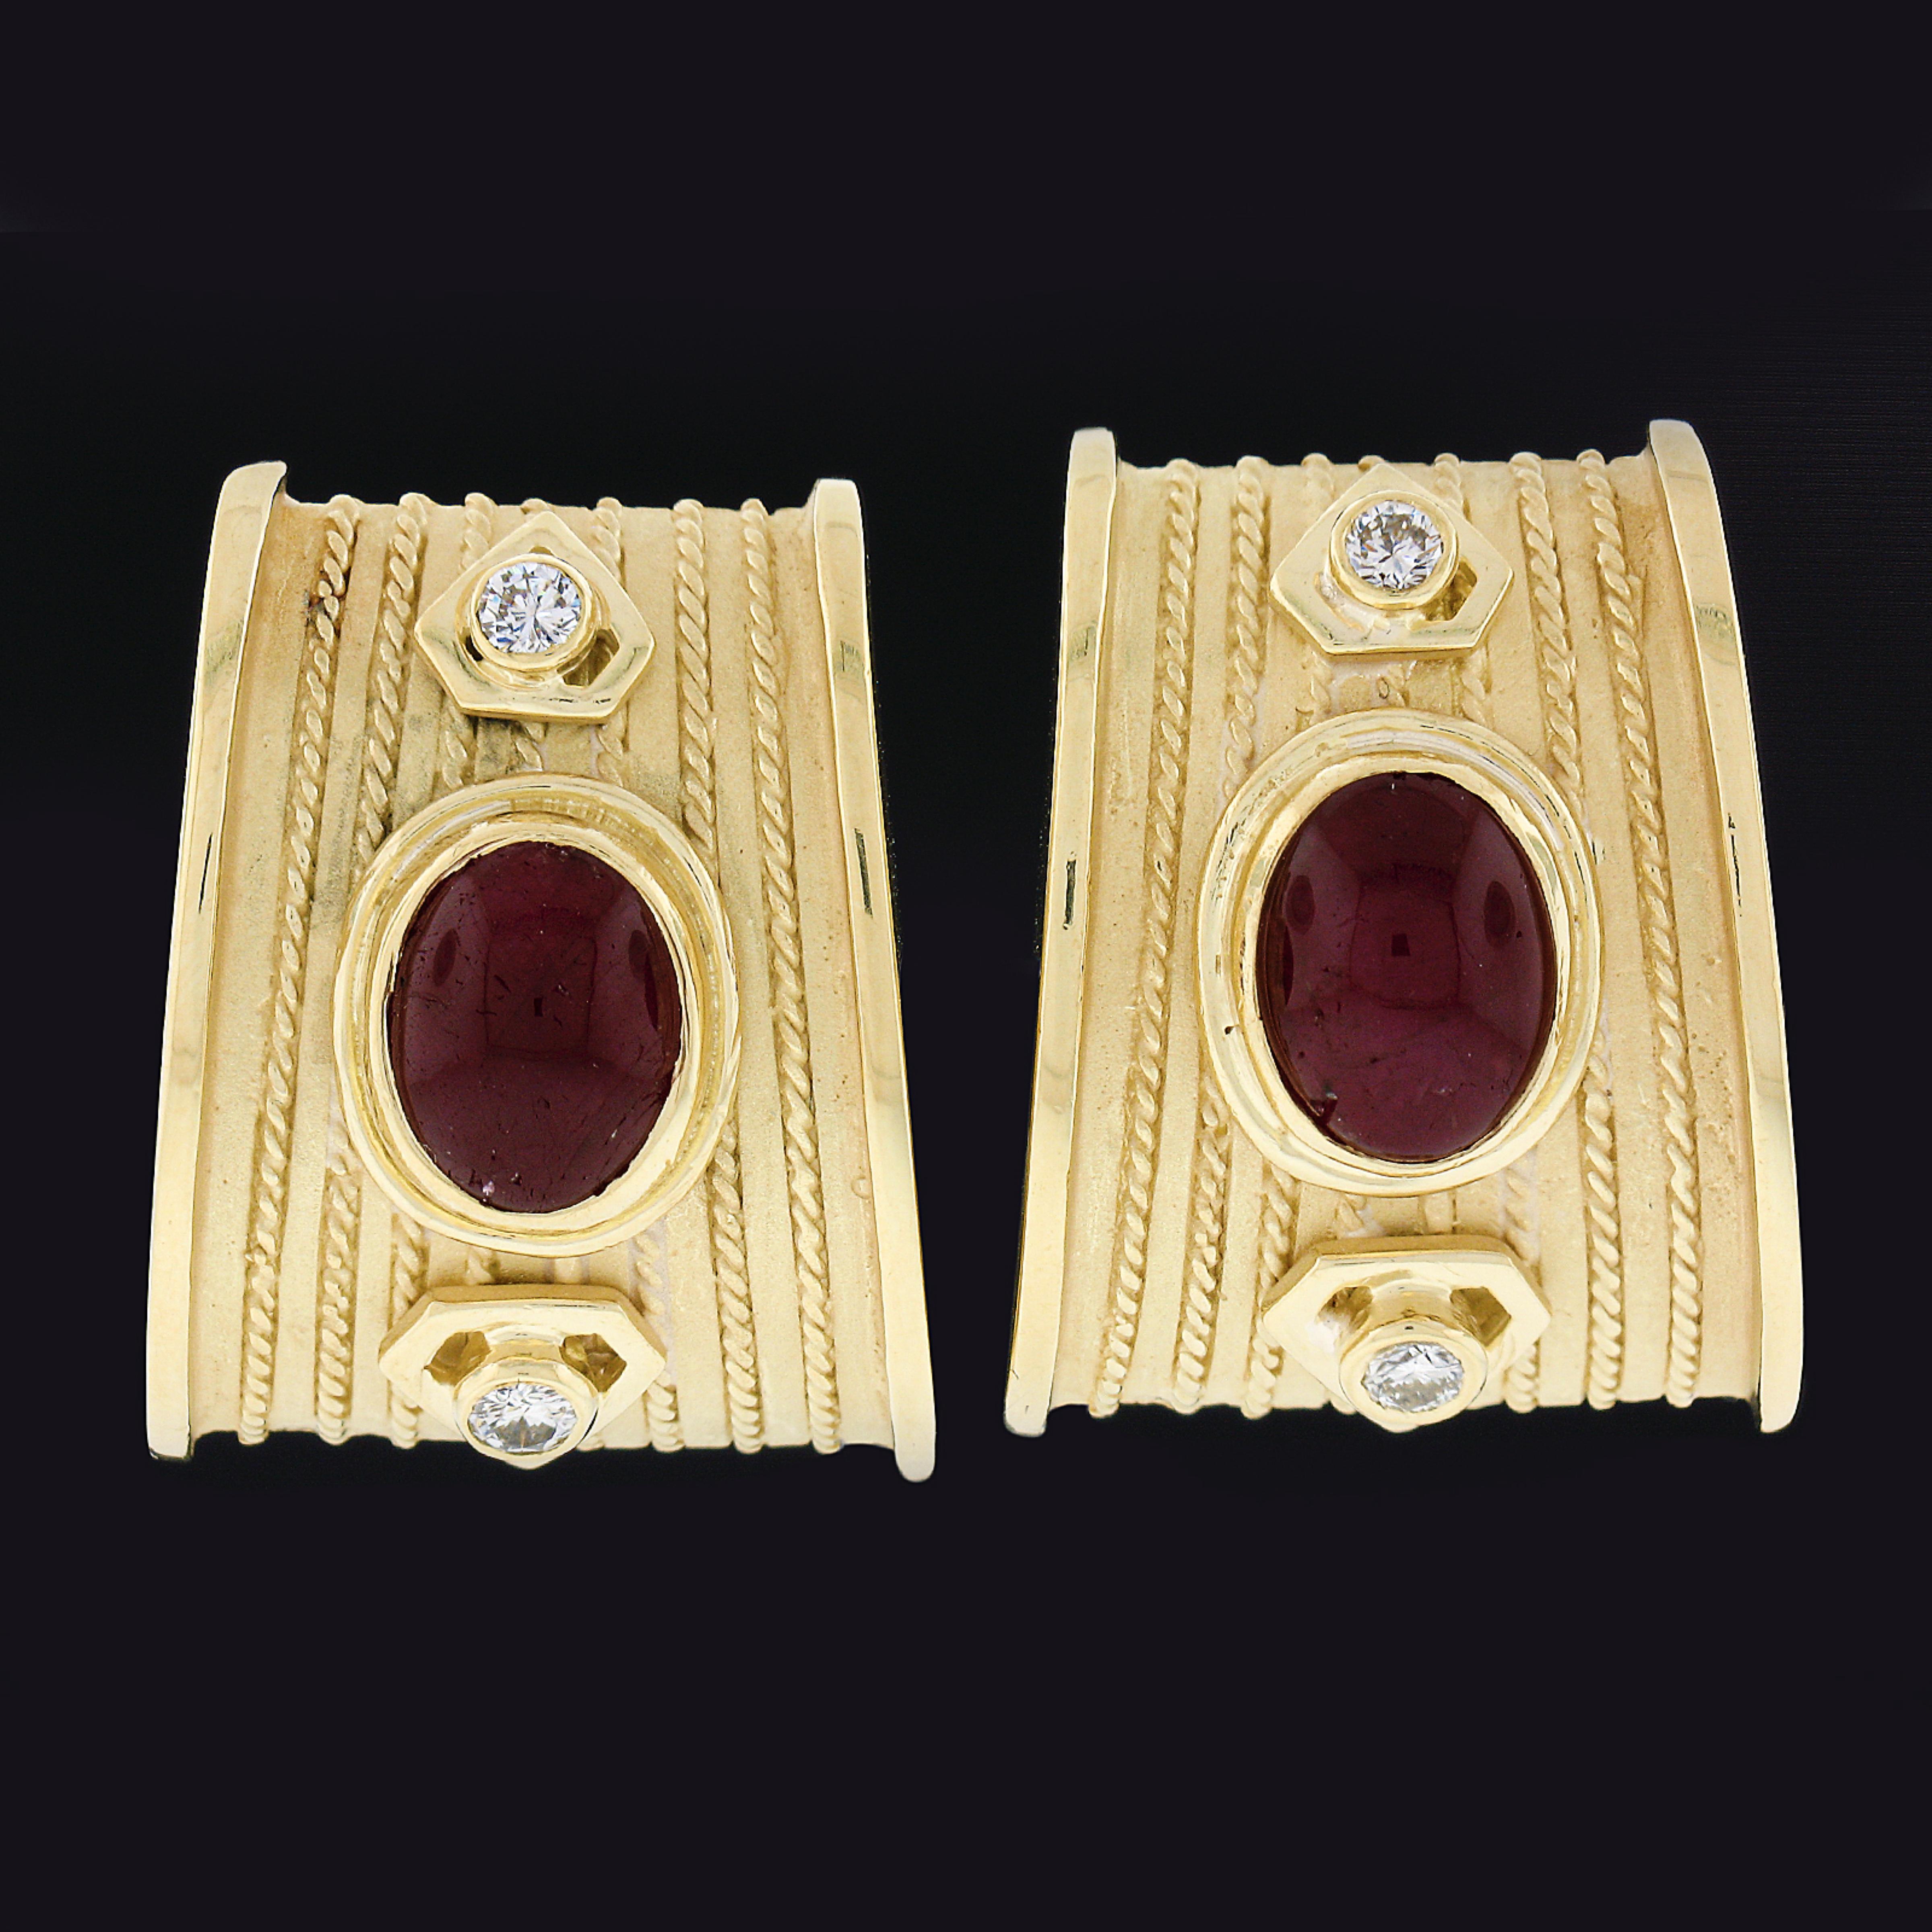 This gorgeous and very well made pair of earrings is crafted in solid 18k yellow gold and feature an absolutely outstanding design set with fine quality rubies and diamonds. These earrings carry oval cabochon cut rubies in which are neatly bezel set